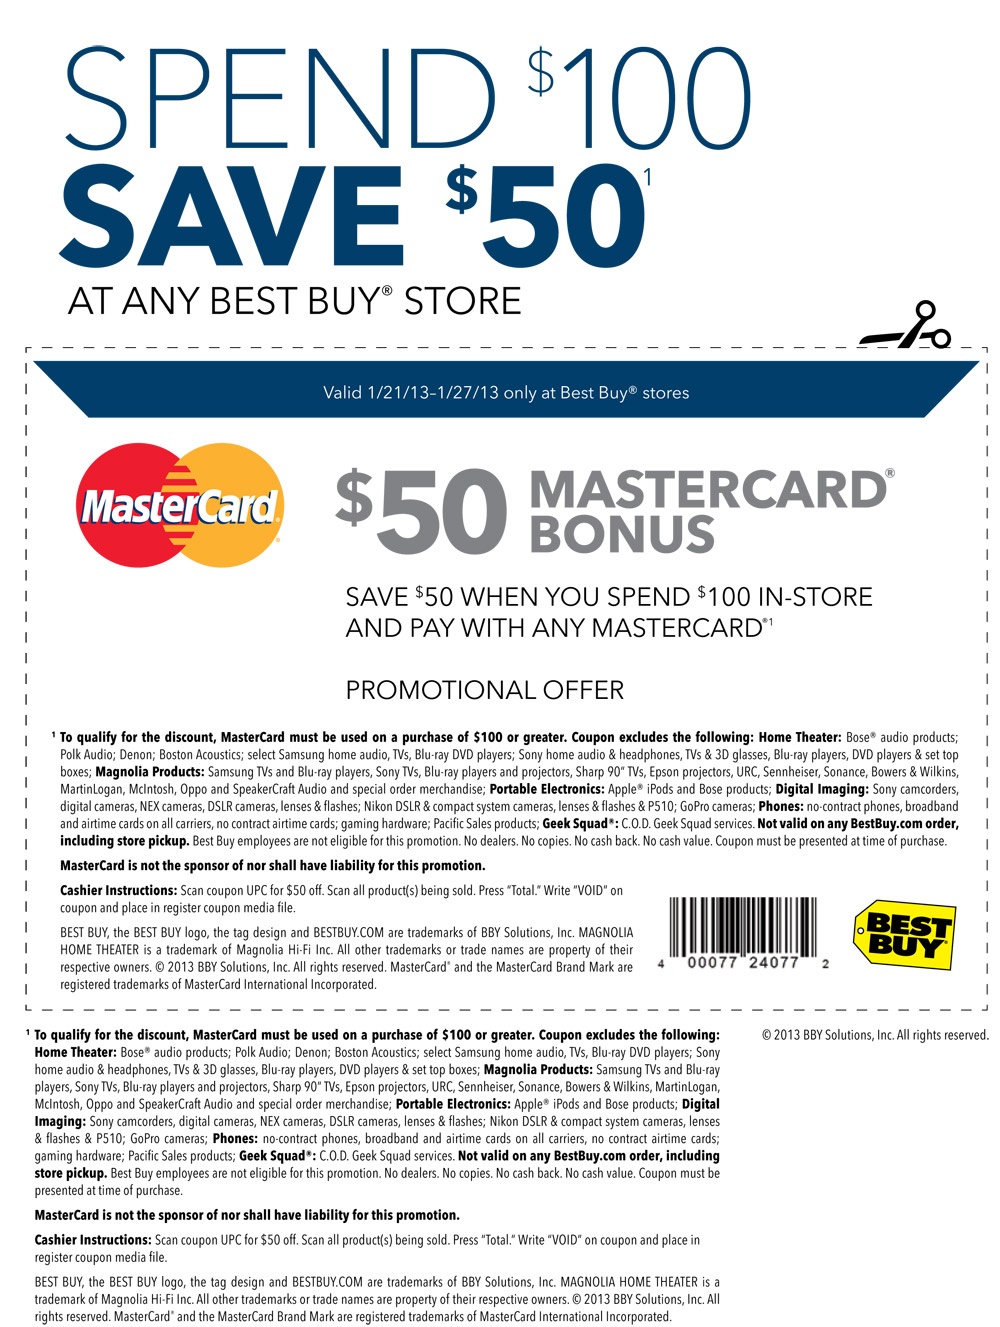 Best Buy Posts 50 Off Coupon On Internet Forgets How Internet Works Consumerist